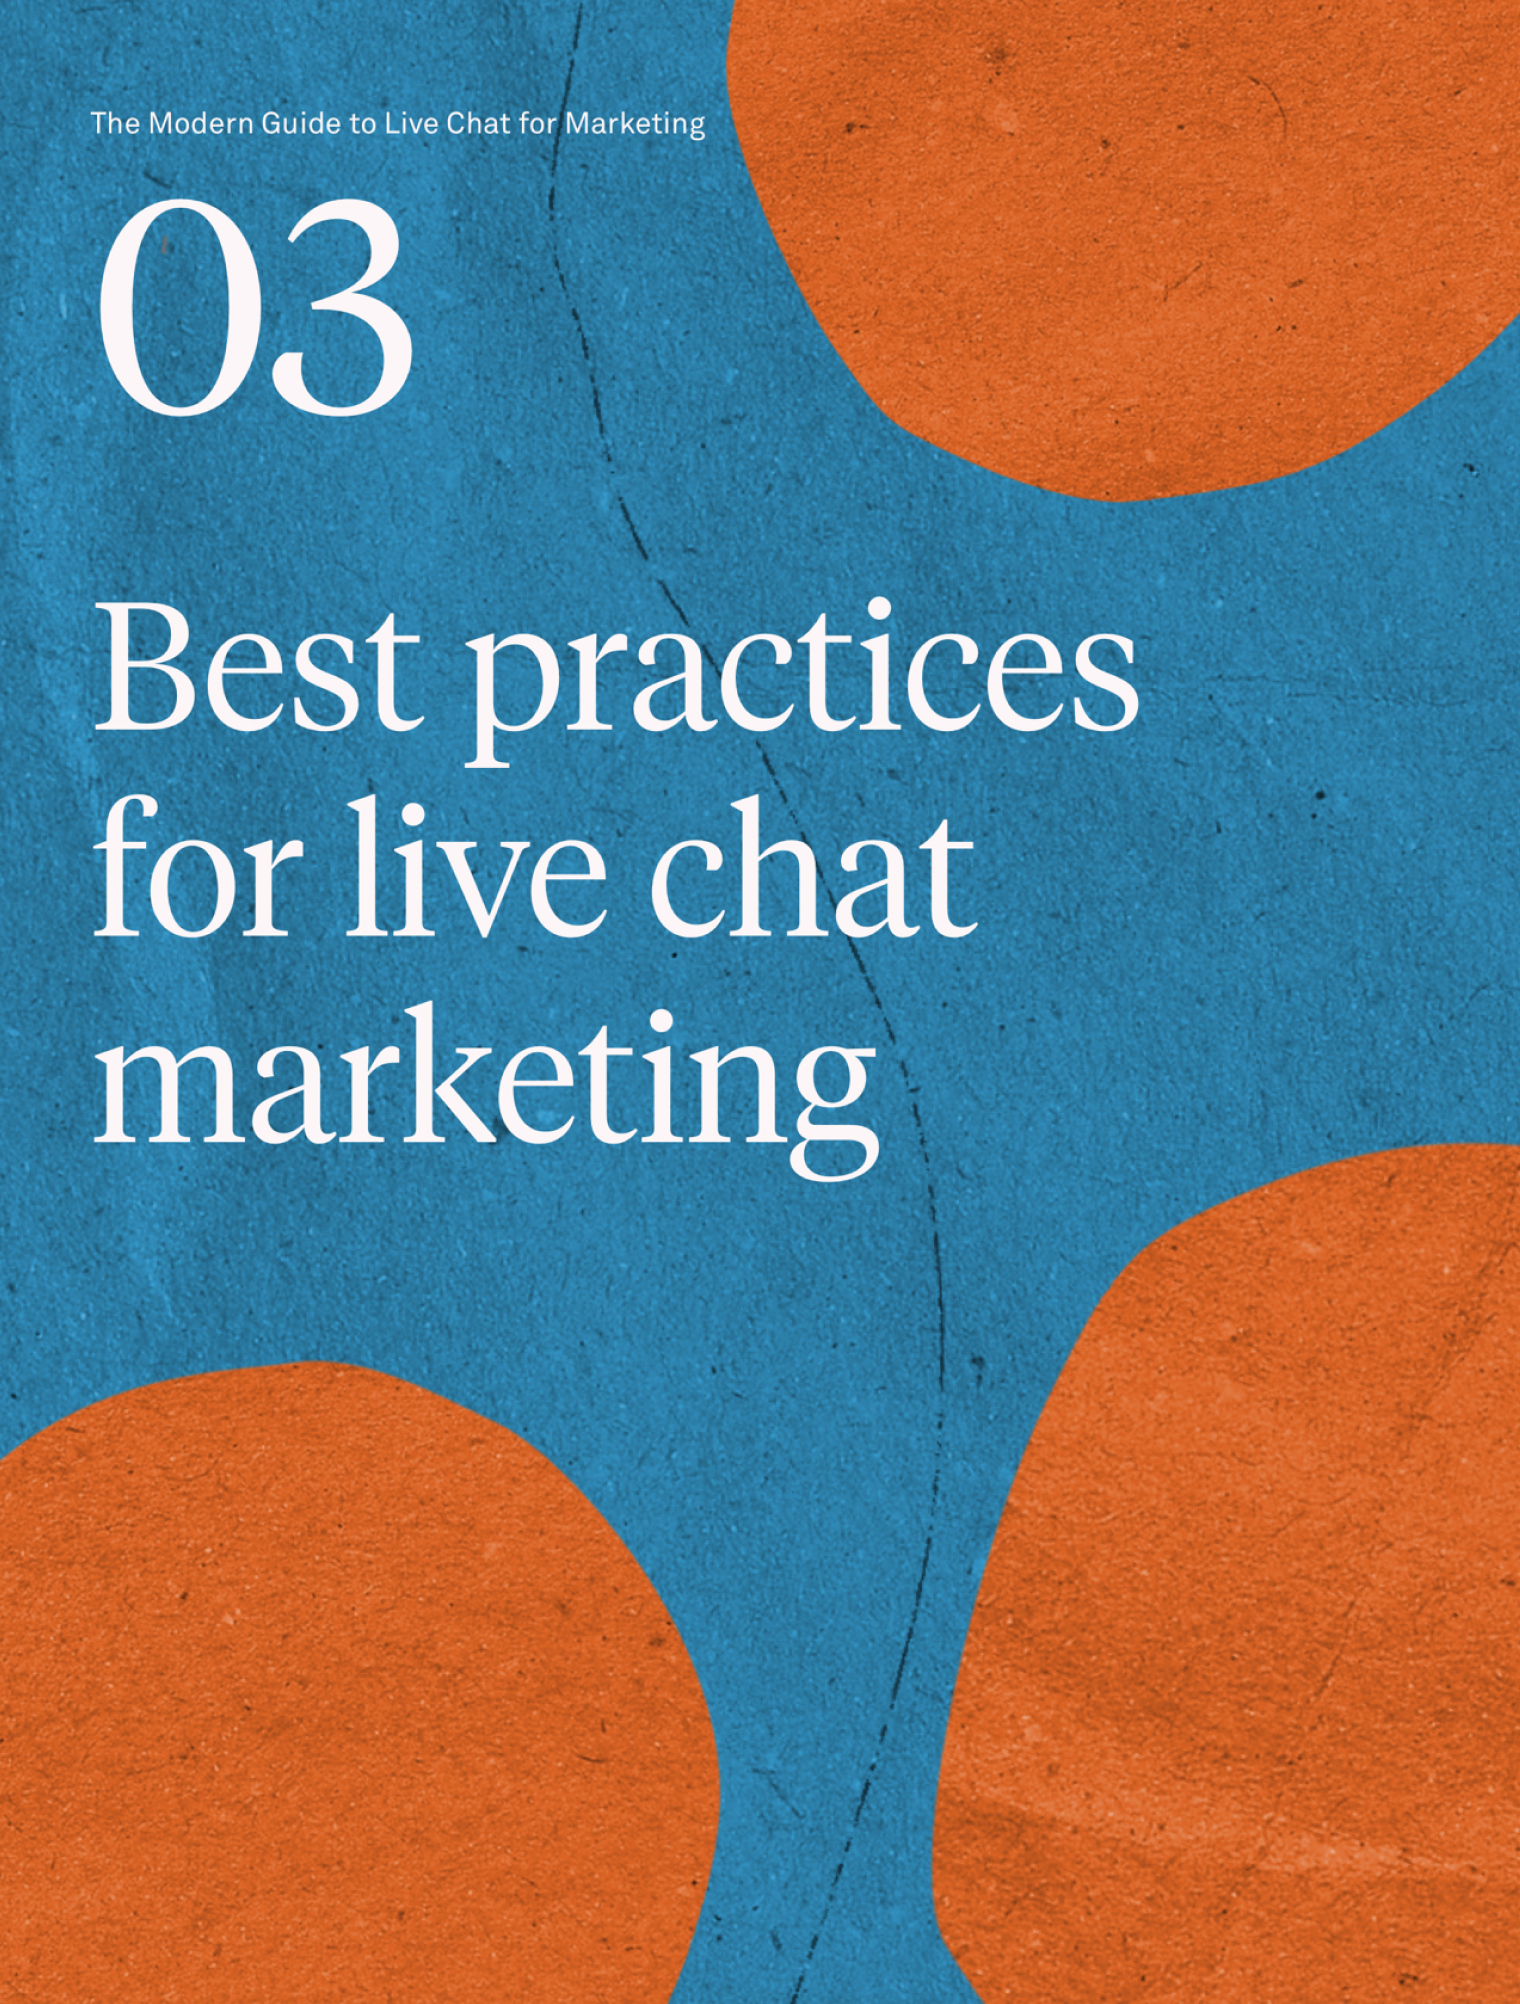 The Modern Guide to Live Chat for Marketing